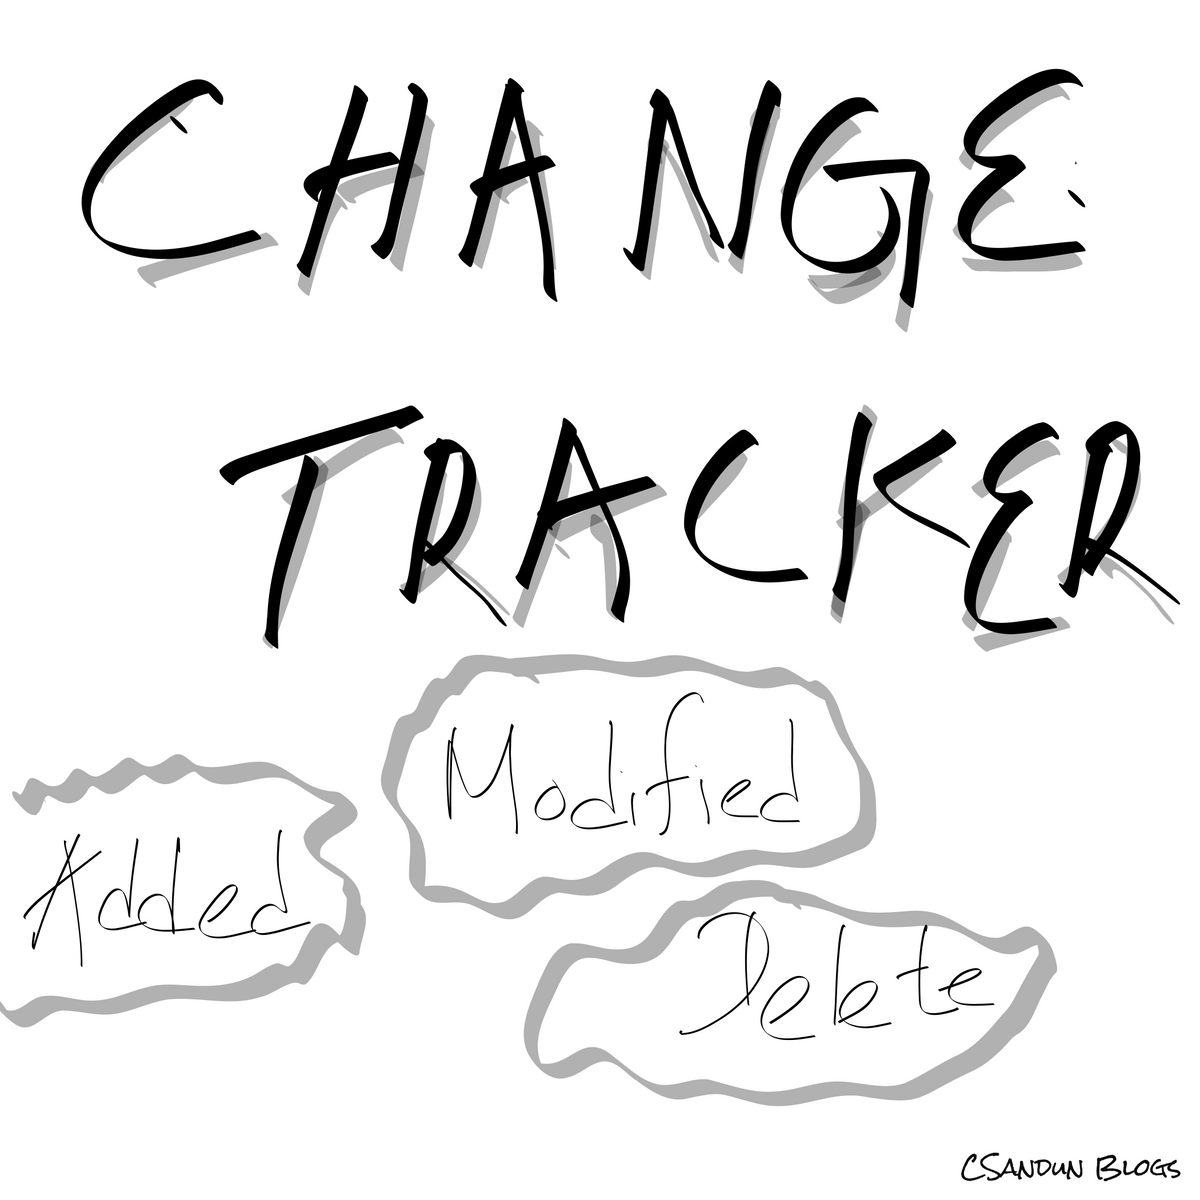 Difference between two lists using ChangeTracker<T1, T2> class